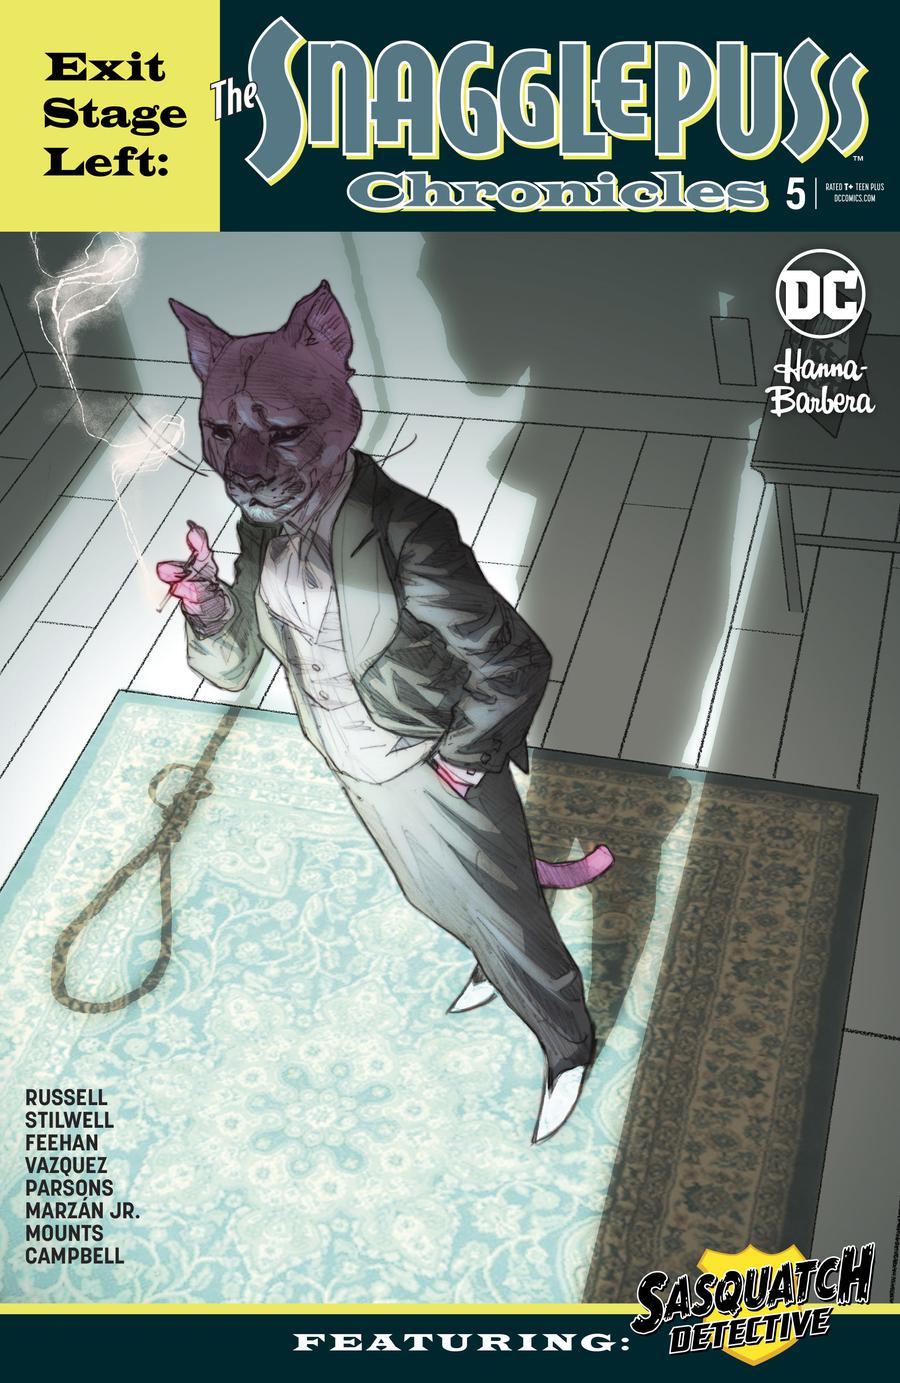 Exit Stage Left The Snagglepuss Chronicles Vol. 1 #5